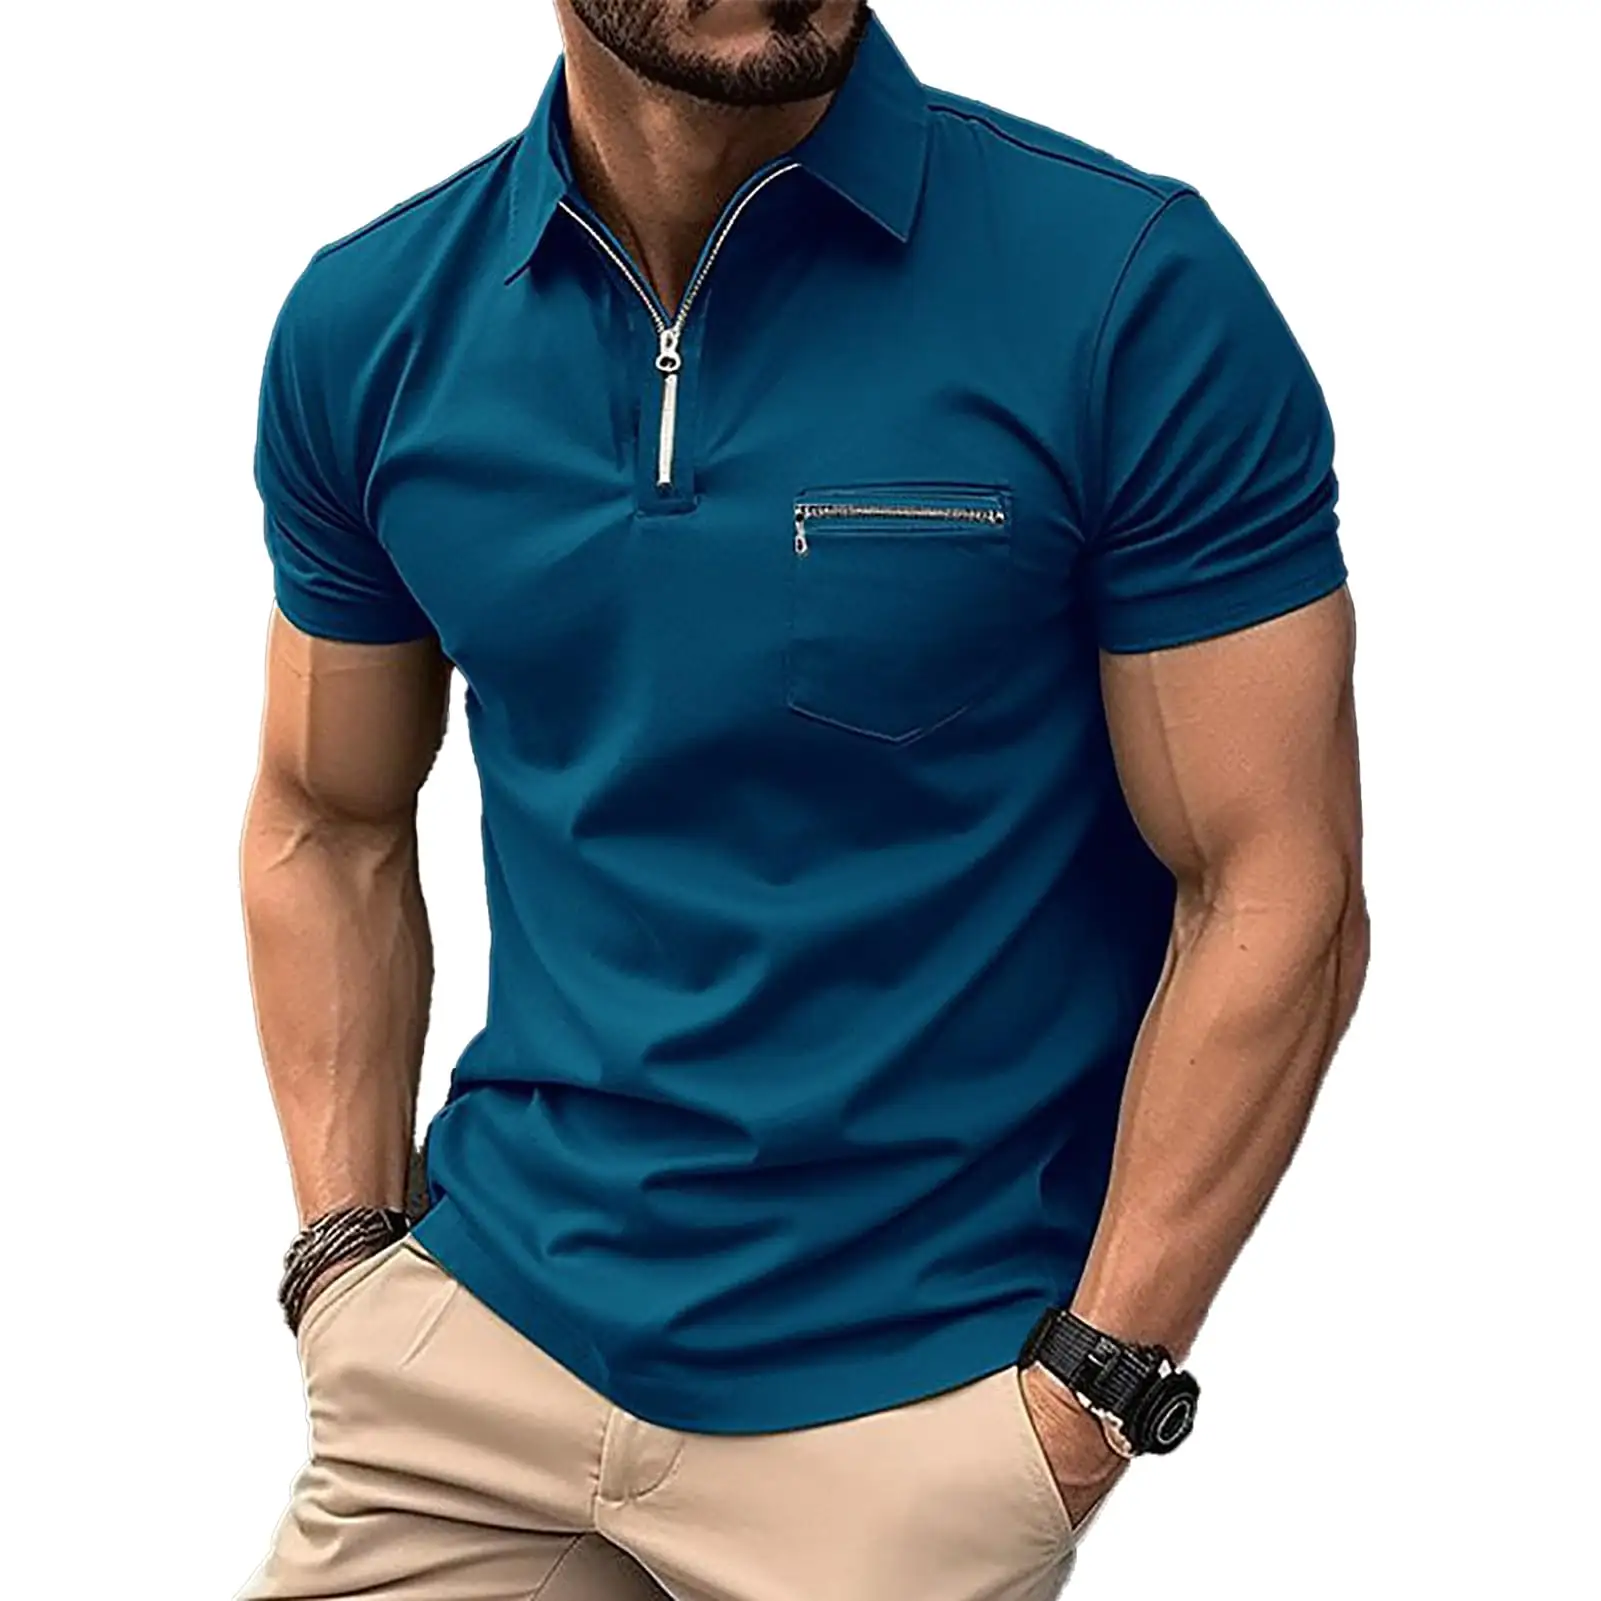 High Quality Custom Men's POLO Shirt with Floral Pattern Short Sleeve and Chest Zipper Pocket Knitted Fabric Digital Printing